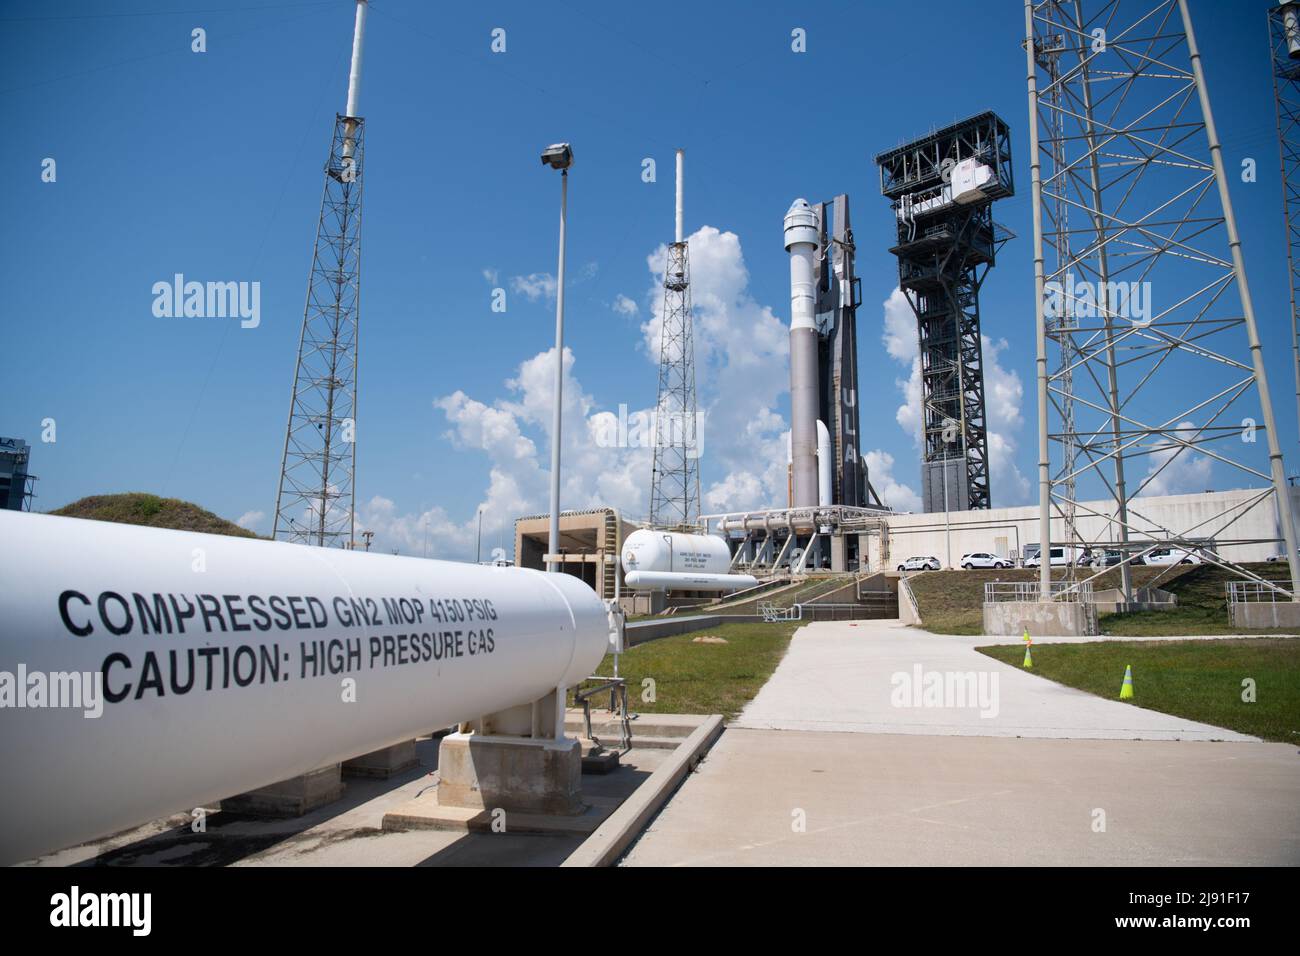 Cape Canaveral, United States of America. 18 May, 2022. The United Launch Alliance Atlas V rocket carrying the Boeing CST-100 Starliner spacecraft aboard after rolling out from the Vertical Integration Facility at Space Launch Complex 41 in preparation for launch, May 18, 2022 in Cape Canaveral, Florida. The Orbital Flight Test-2 will be second un-crewed flight test and will dock to the International Space Station and is expected to lift off May 19th. Credit: Joel Kowsky/NASA/Alamy Live News Stock Photo